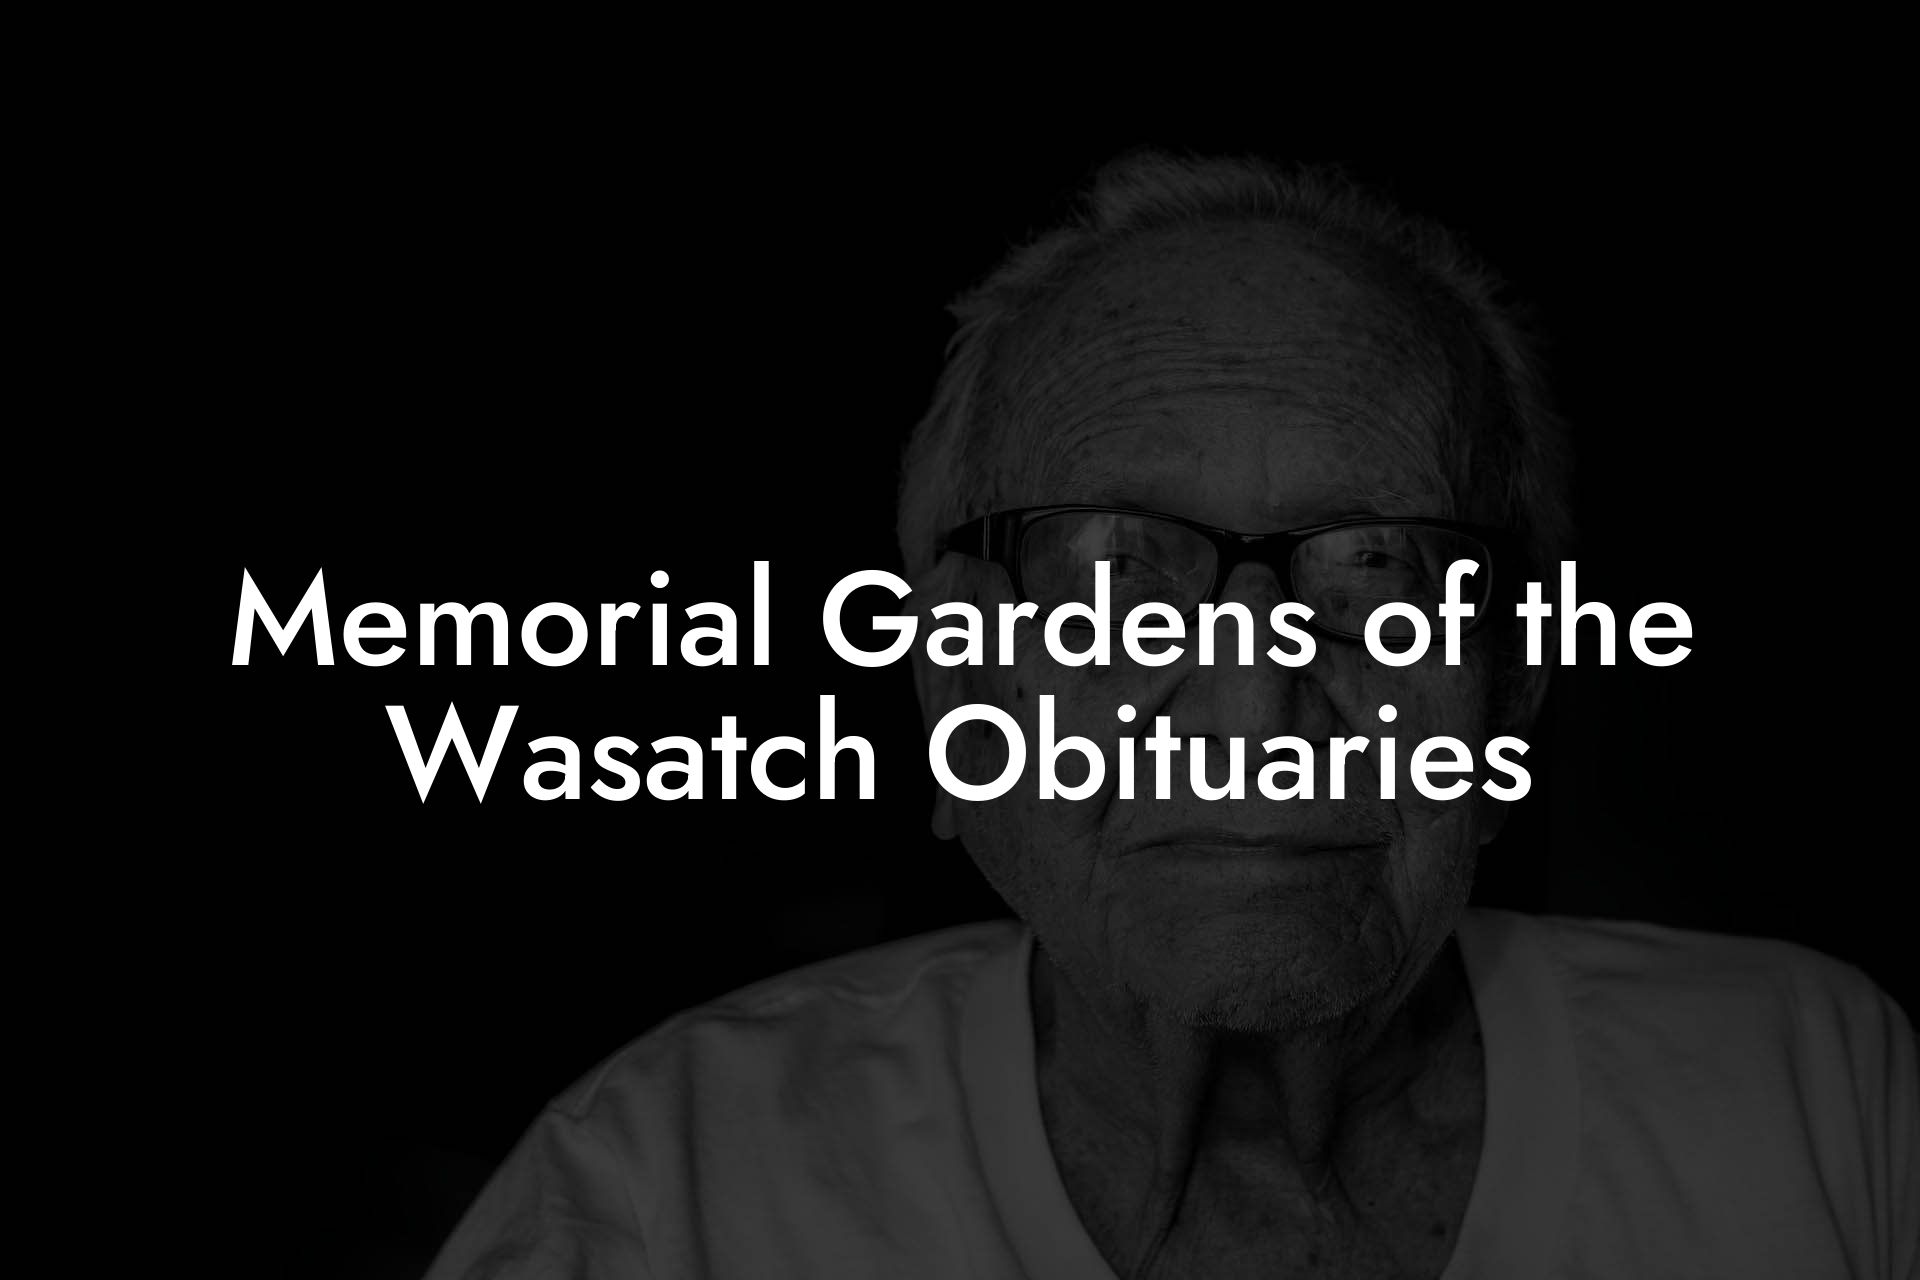 Memorial Gardens of the Wasatch Obituaries